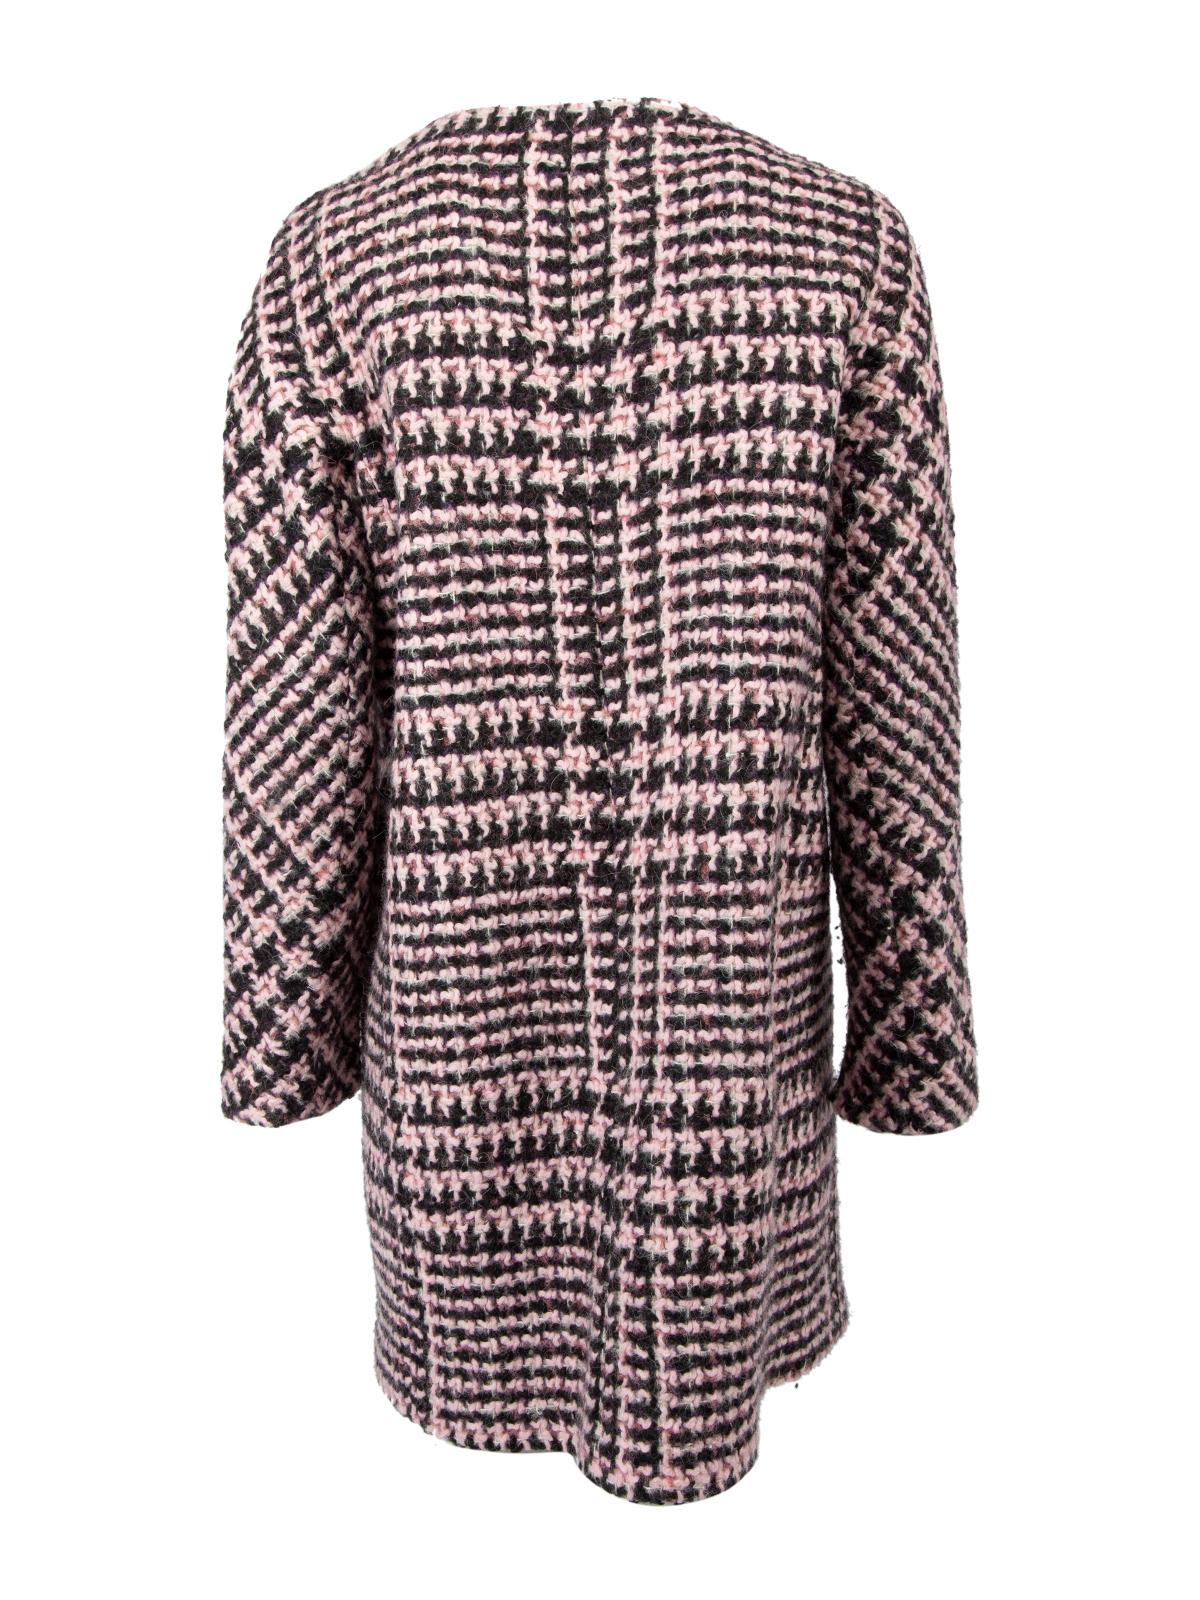 Pre-Loved Ermanno Scervino Women's Pink and Brown Tweed Long Coat In Excellent Condition For Sale In London, GB